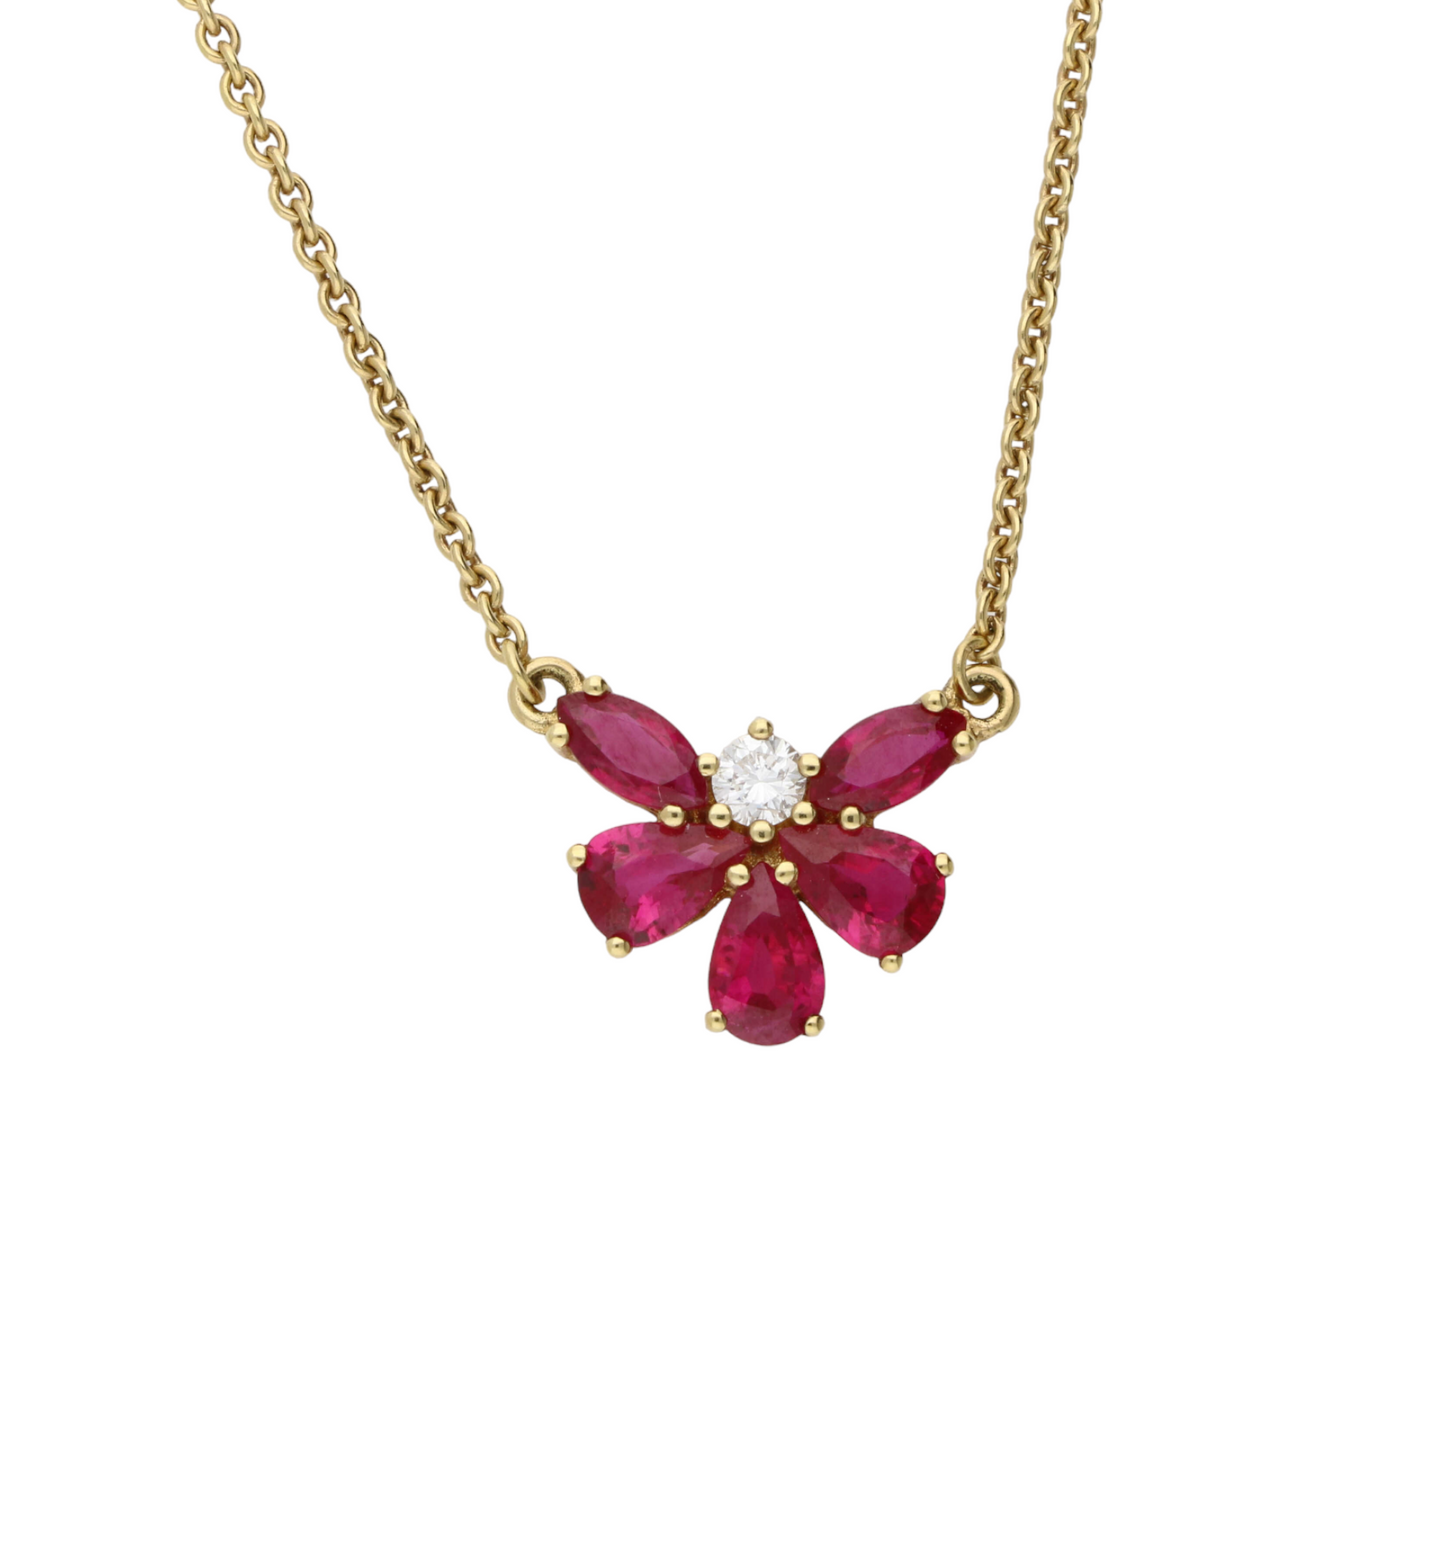 18ct ruby and diamond pendant necklace